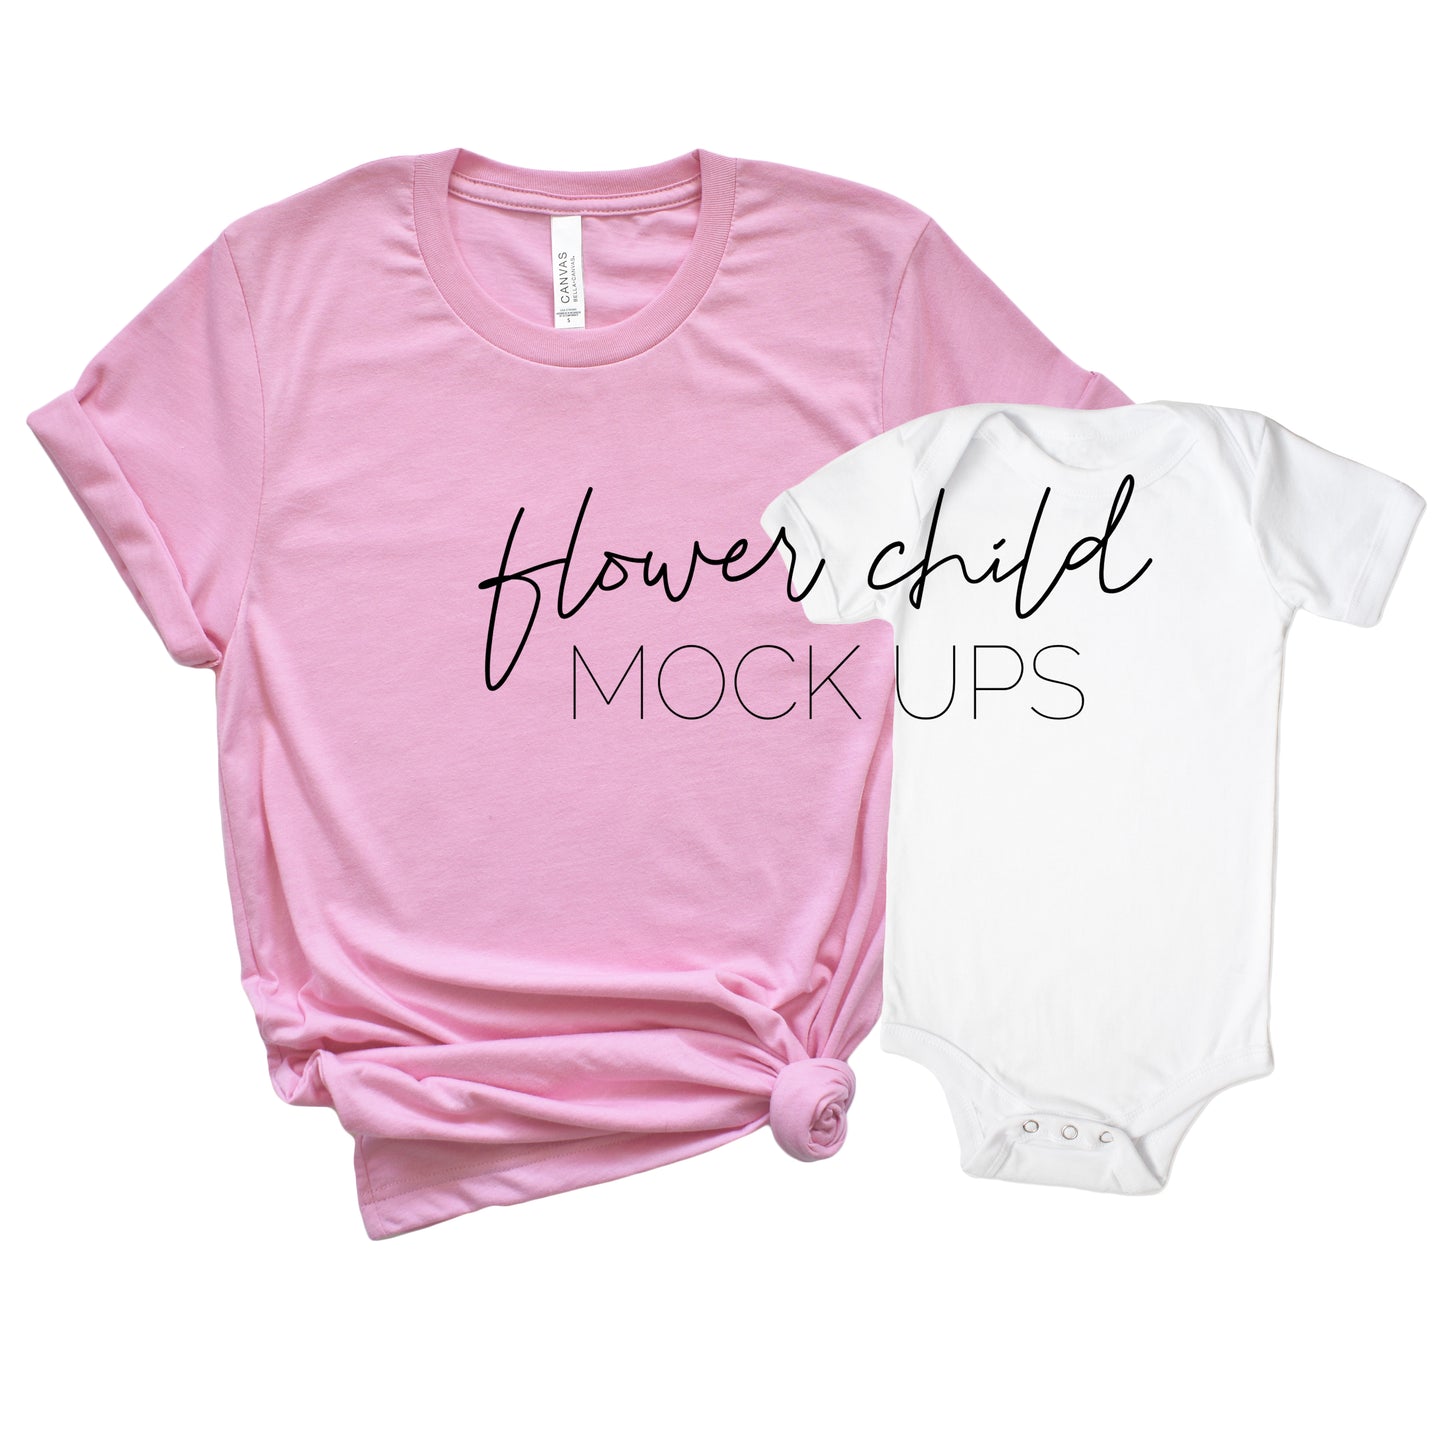 Bella Canvas 3001 Heather Bubble Gum Mommy and Me Mockup - flowerchildmockups